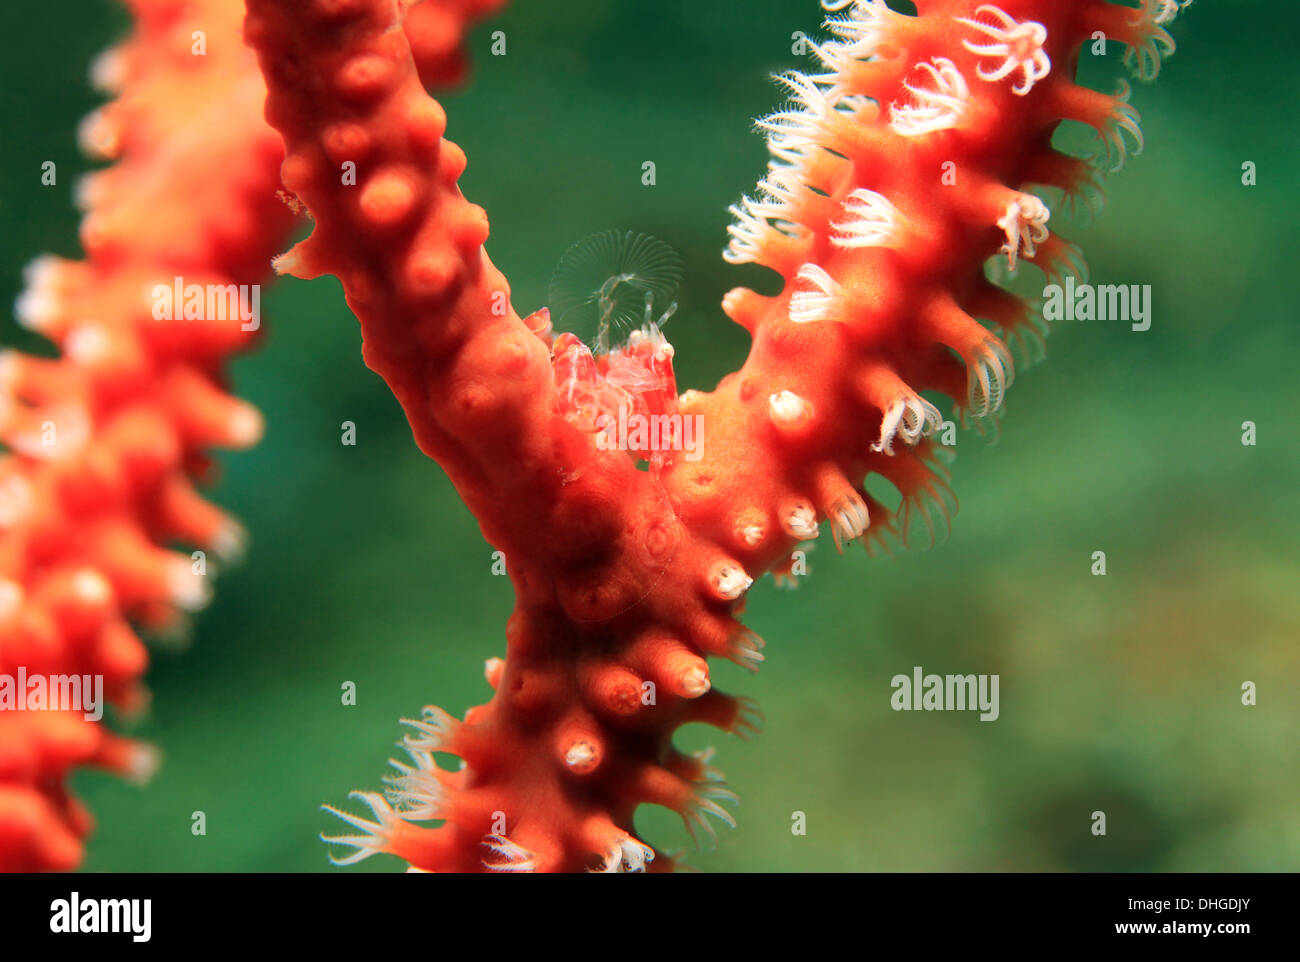 Sea Pen Porcelain Crab (Porcellanella Picta) Filtering the Water for Food, Lembeh Strait, Indonesia Stock Photo